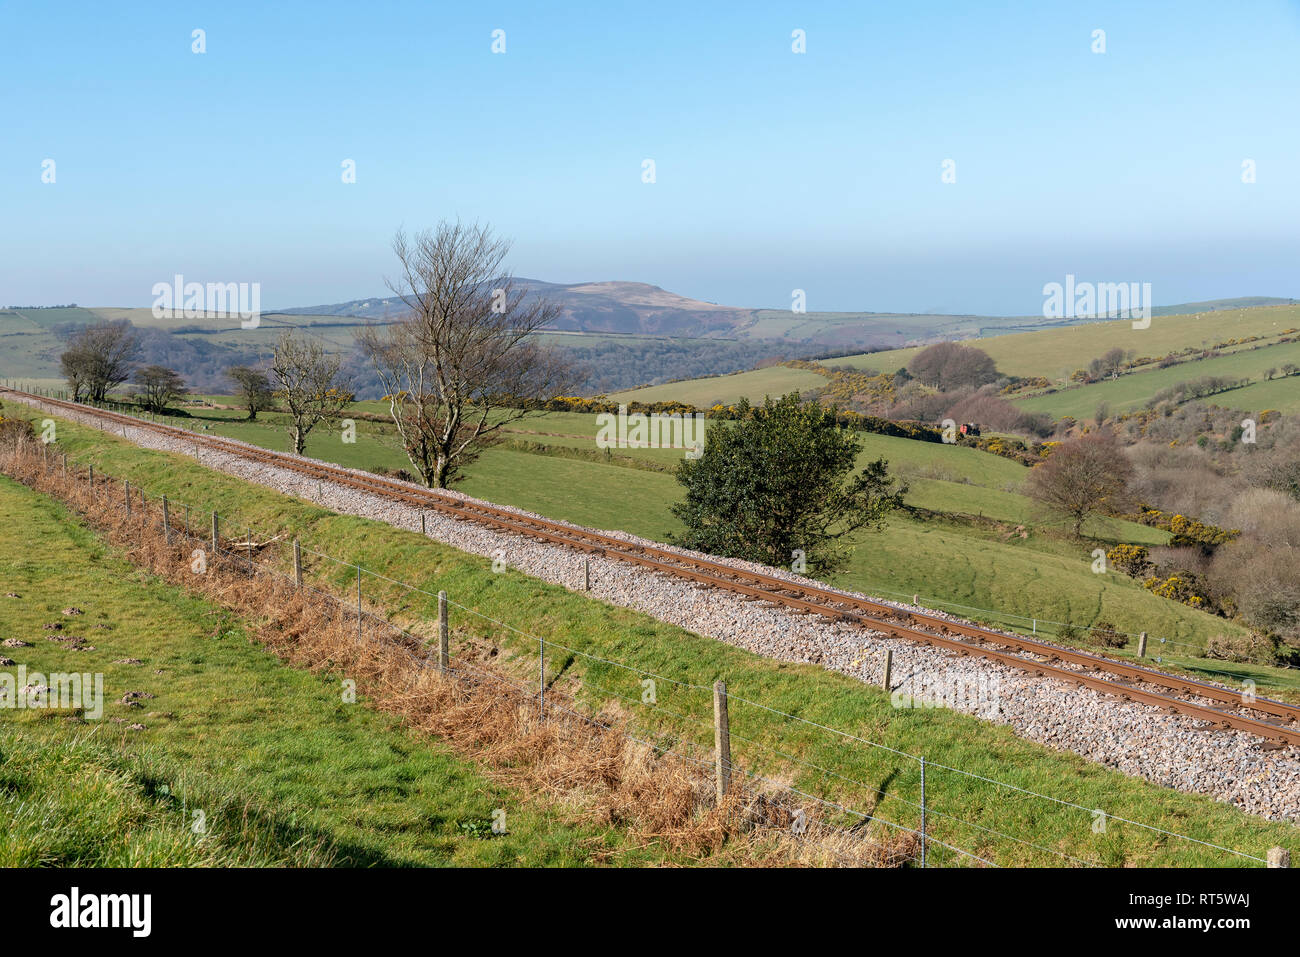 Parracombe, Devon, England, UK, February 2019. A view of the Heddon Valley on Exmoor with a narrow guage railway line of the Lynton & Barnstaple Railw Stock Photo